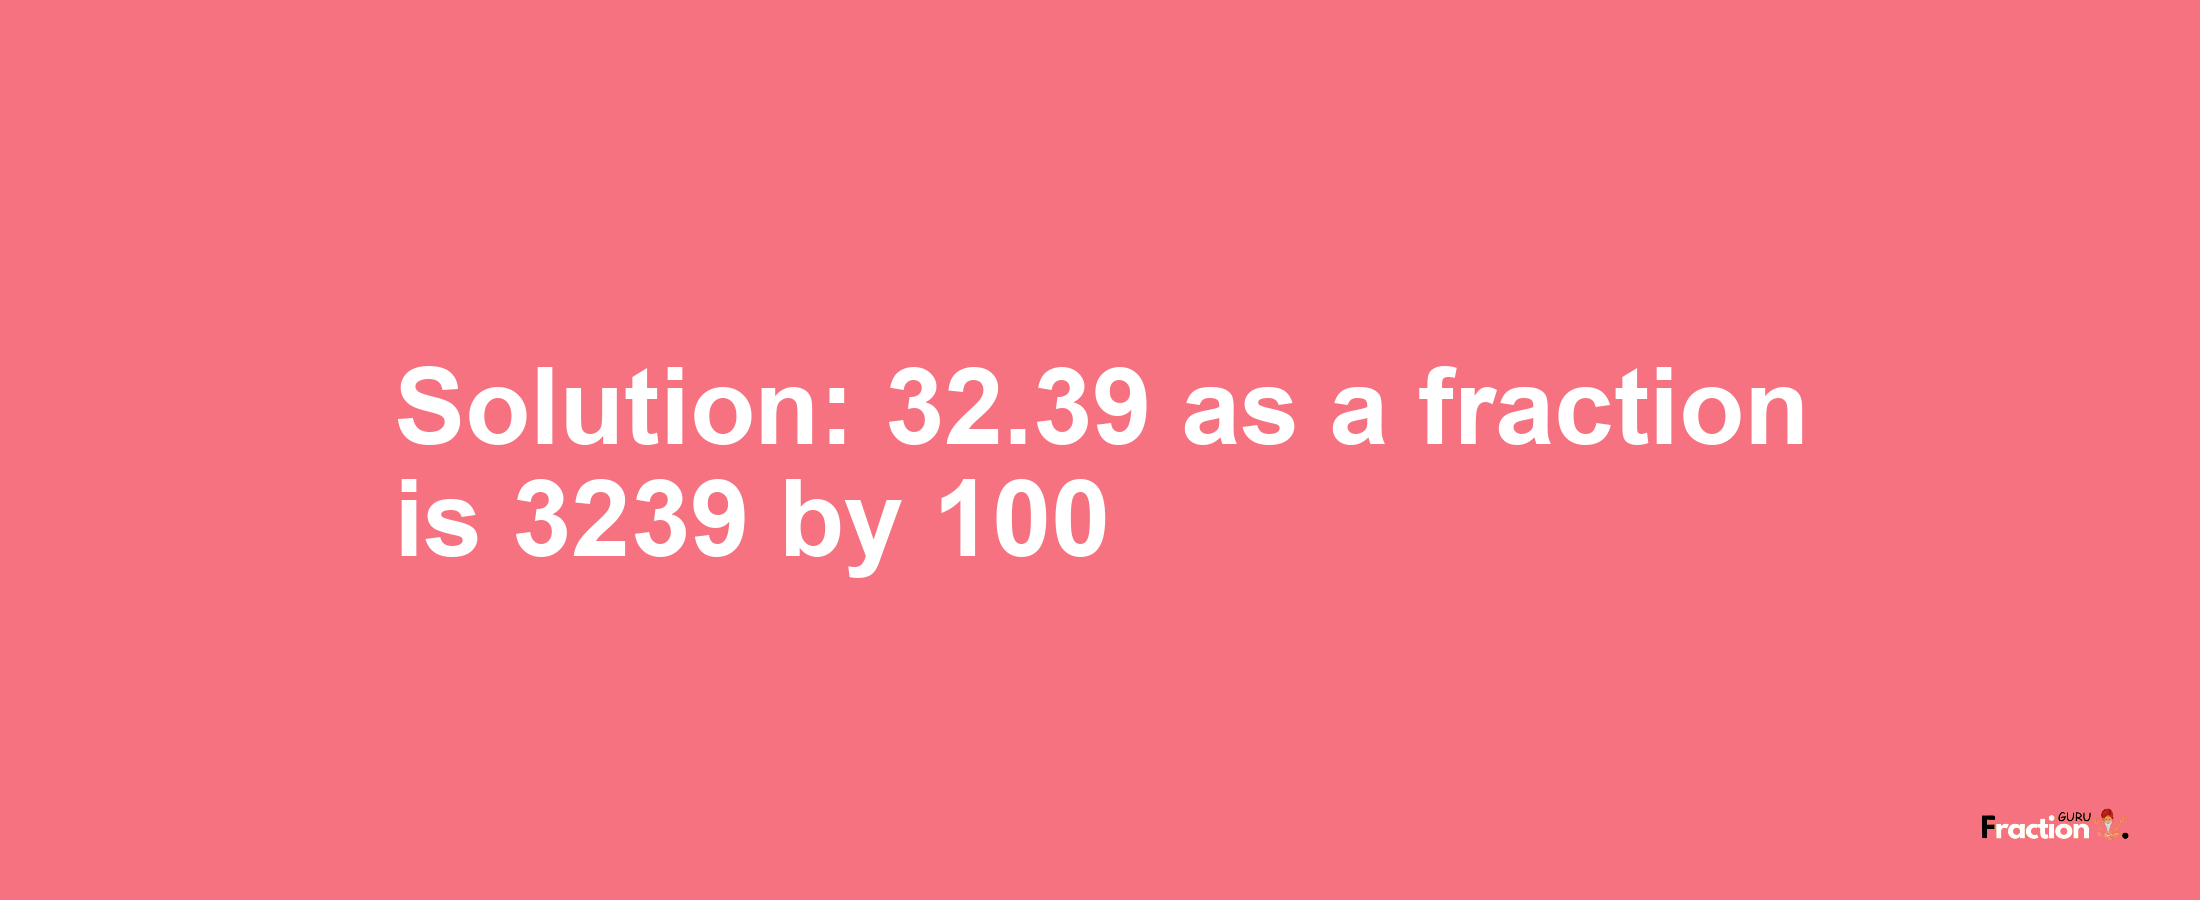 Solution:32.39 as a fraction is 3239/100